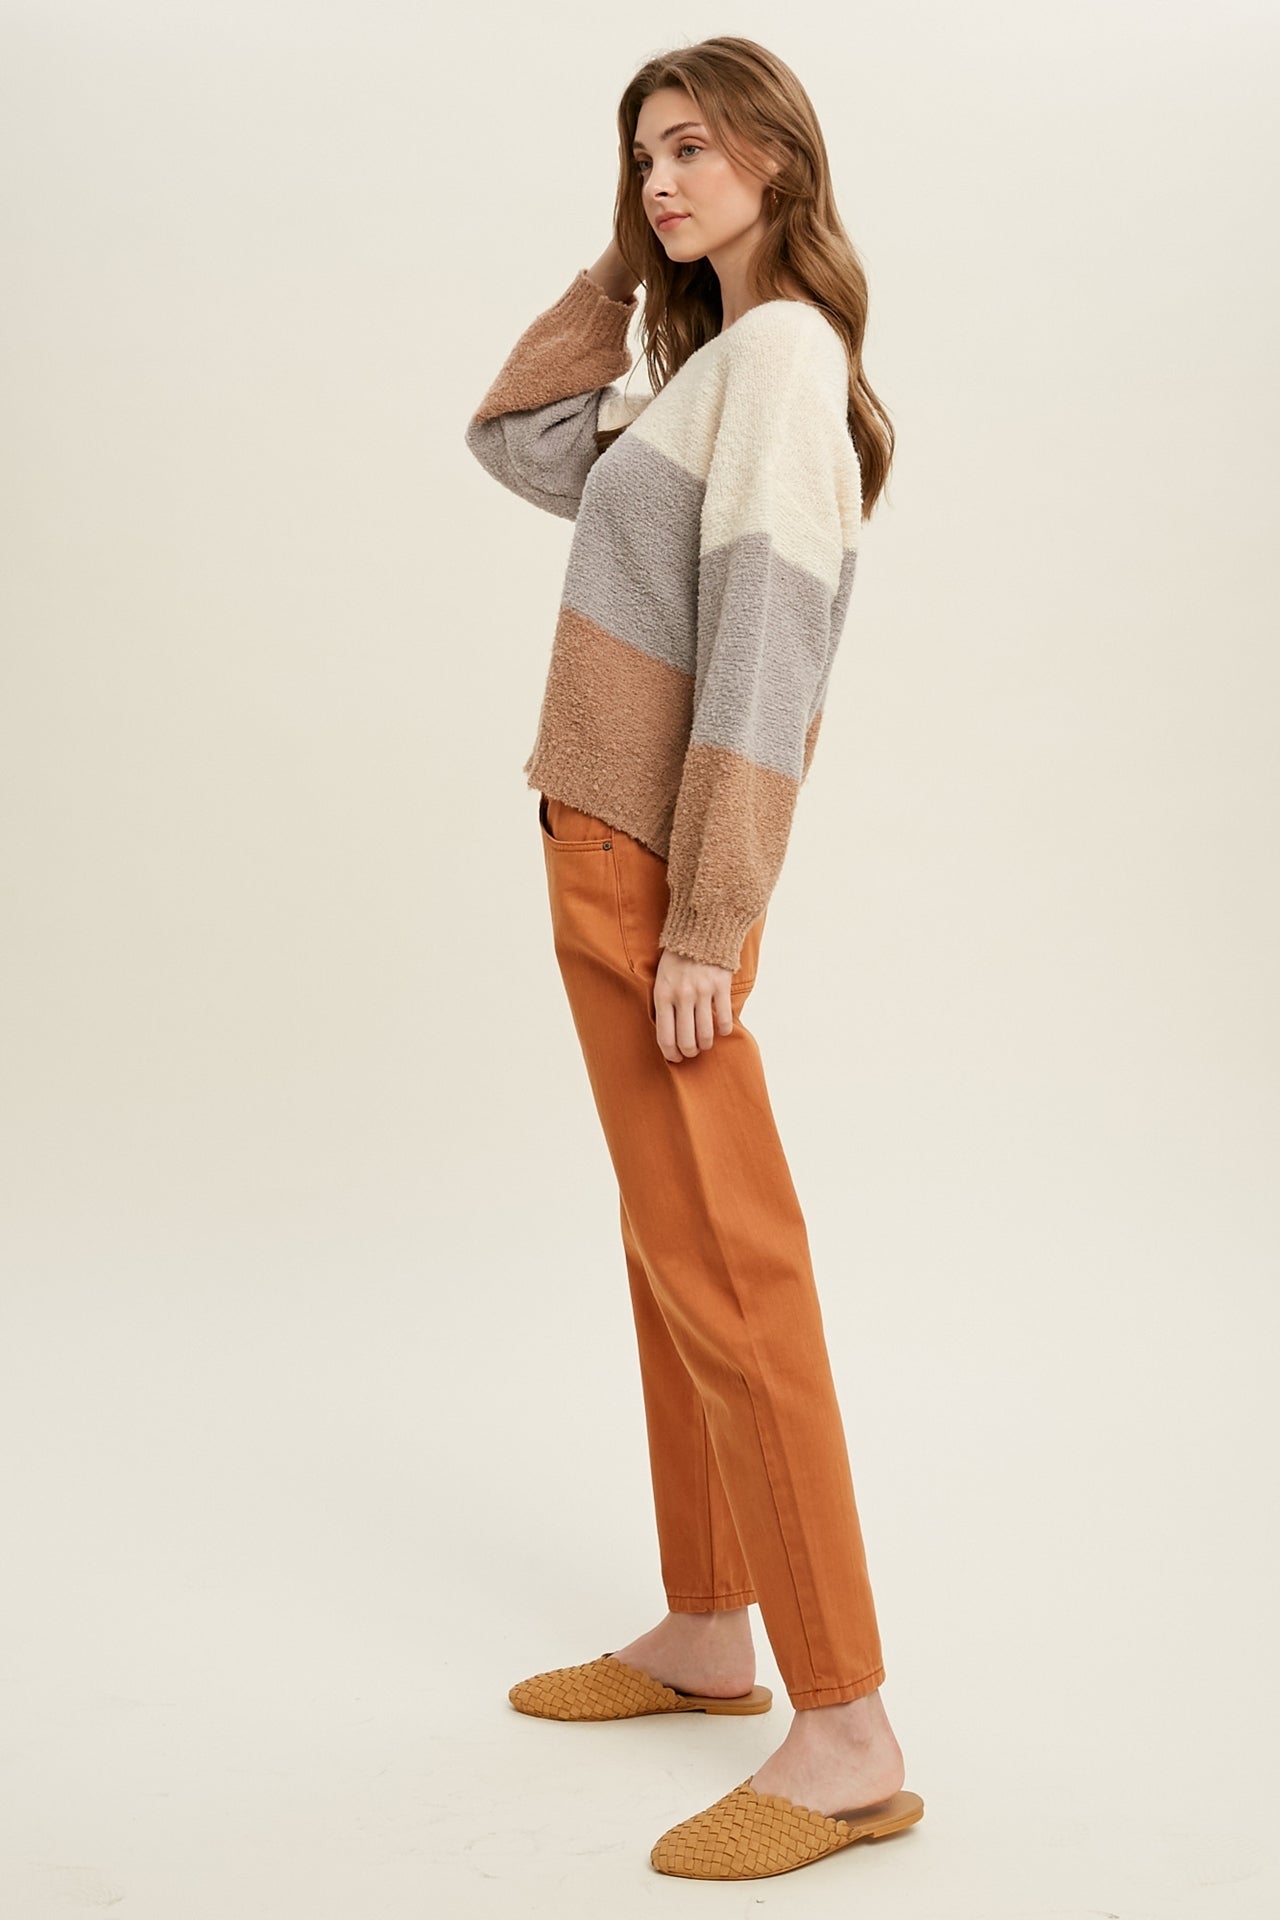 Colorblock Balloon Sleeve Sweater in the Grey/Mocha color combination.. Side view.